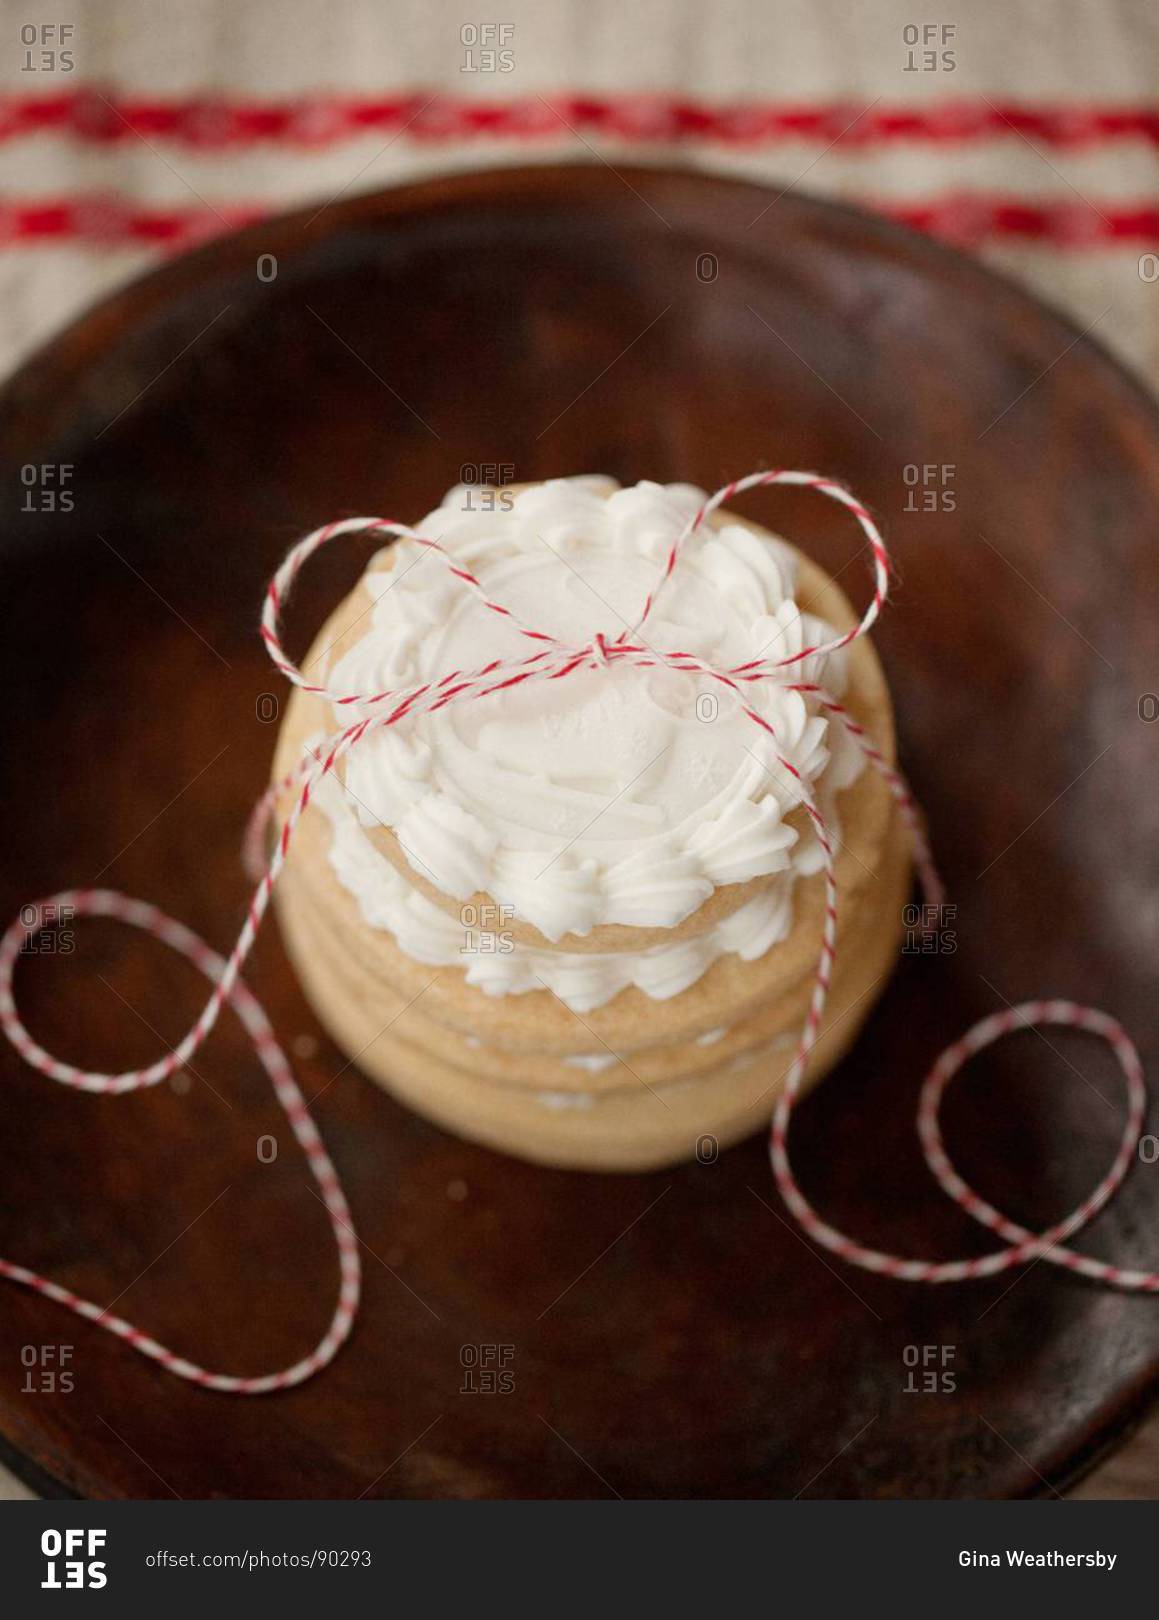 Decorative cookies with white buttercream as holiday gift